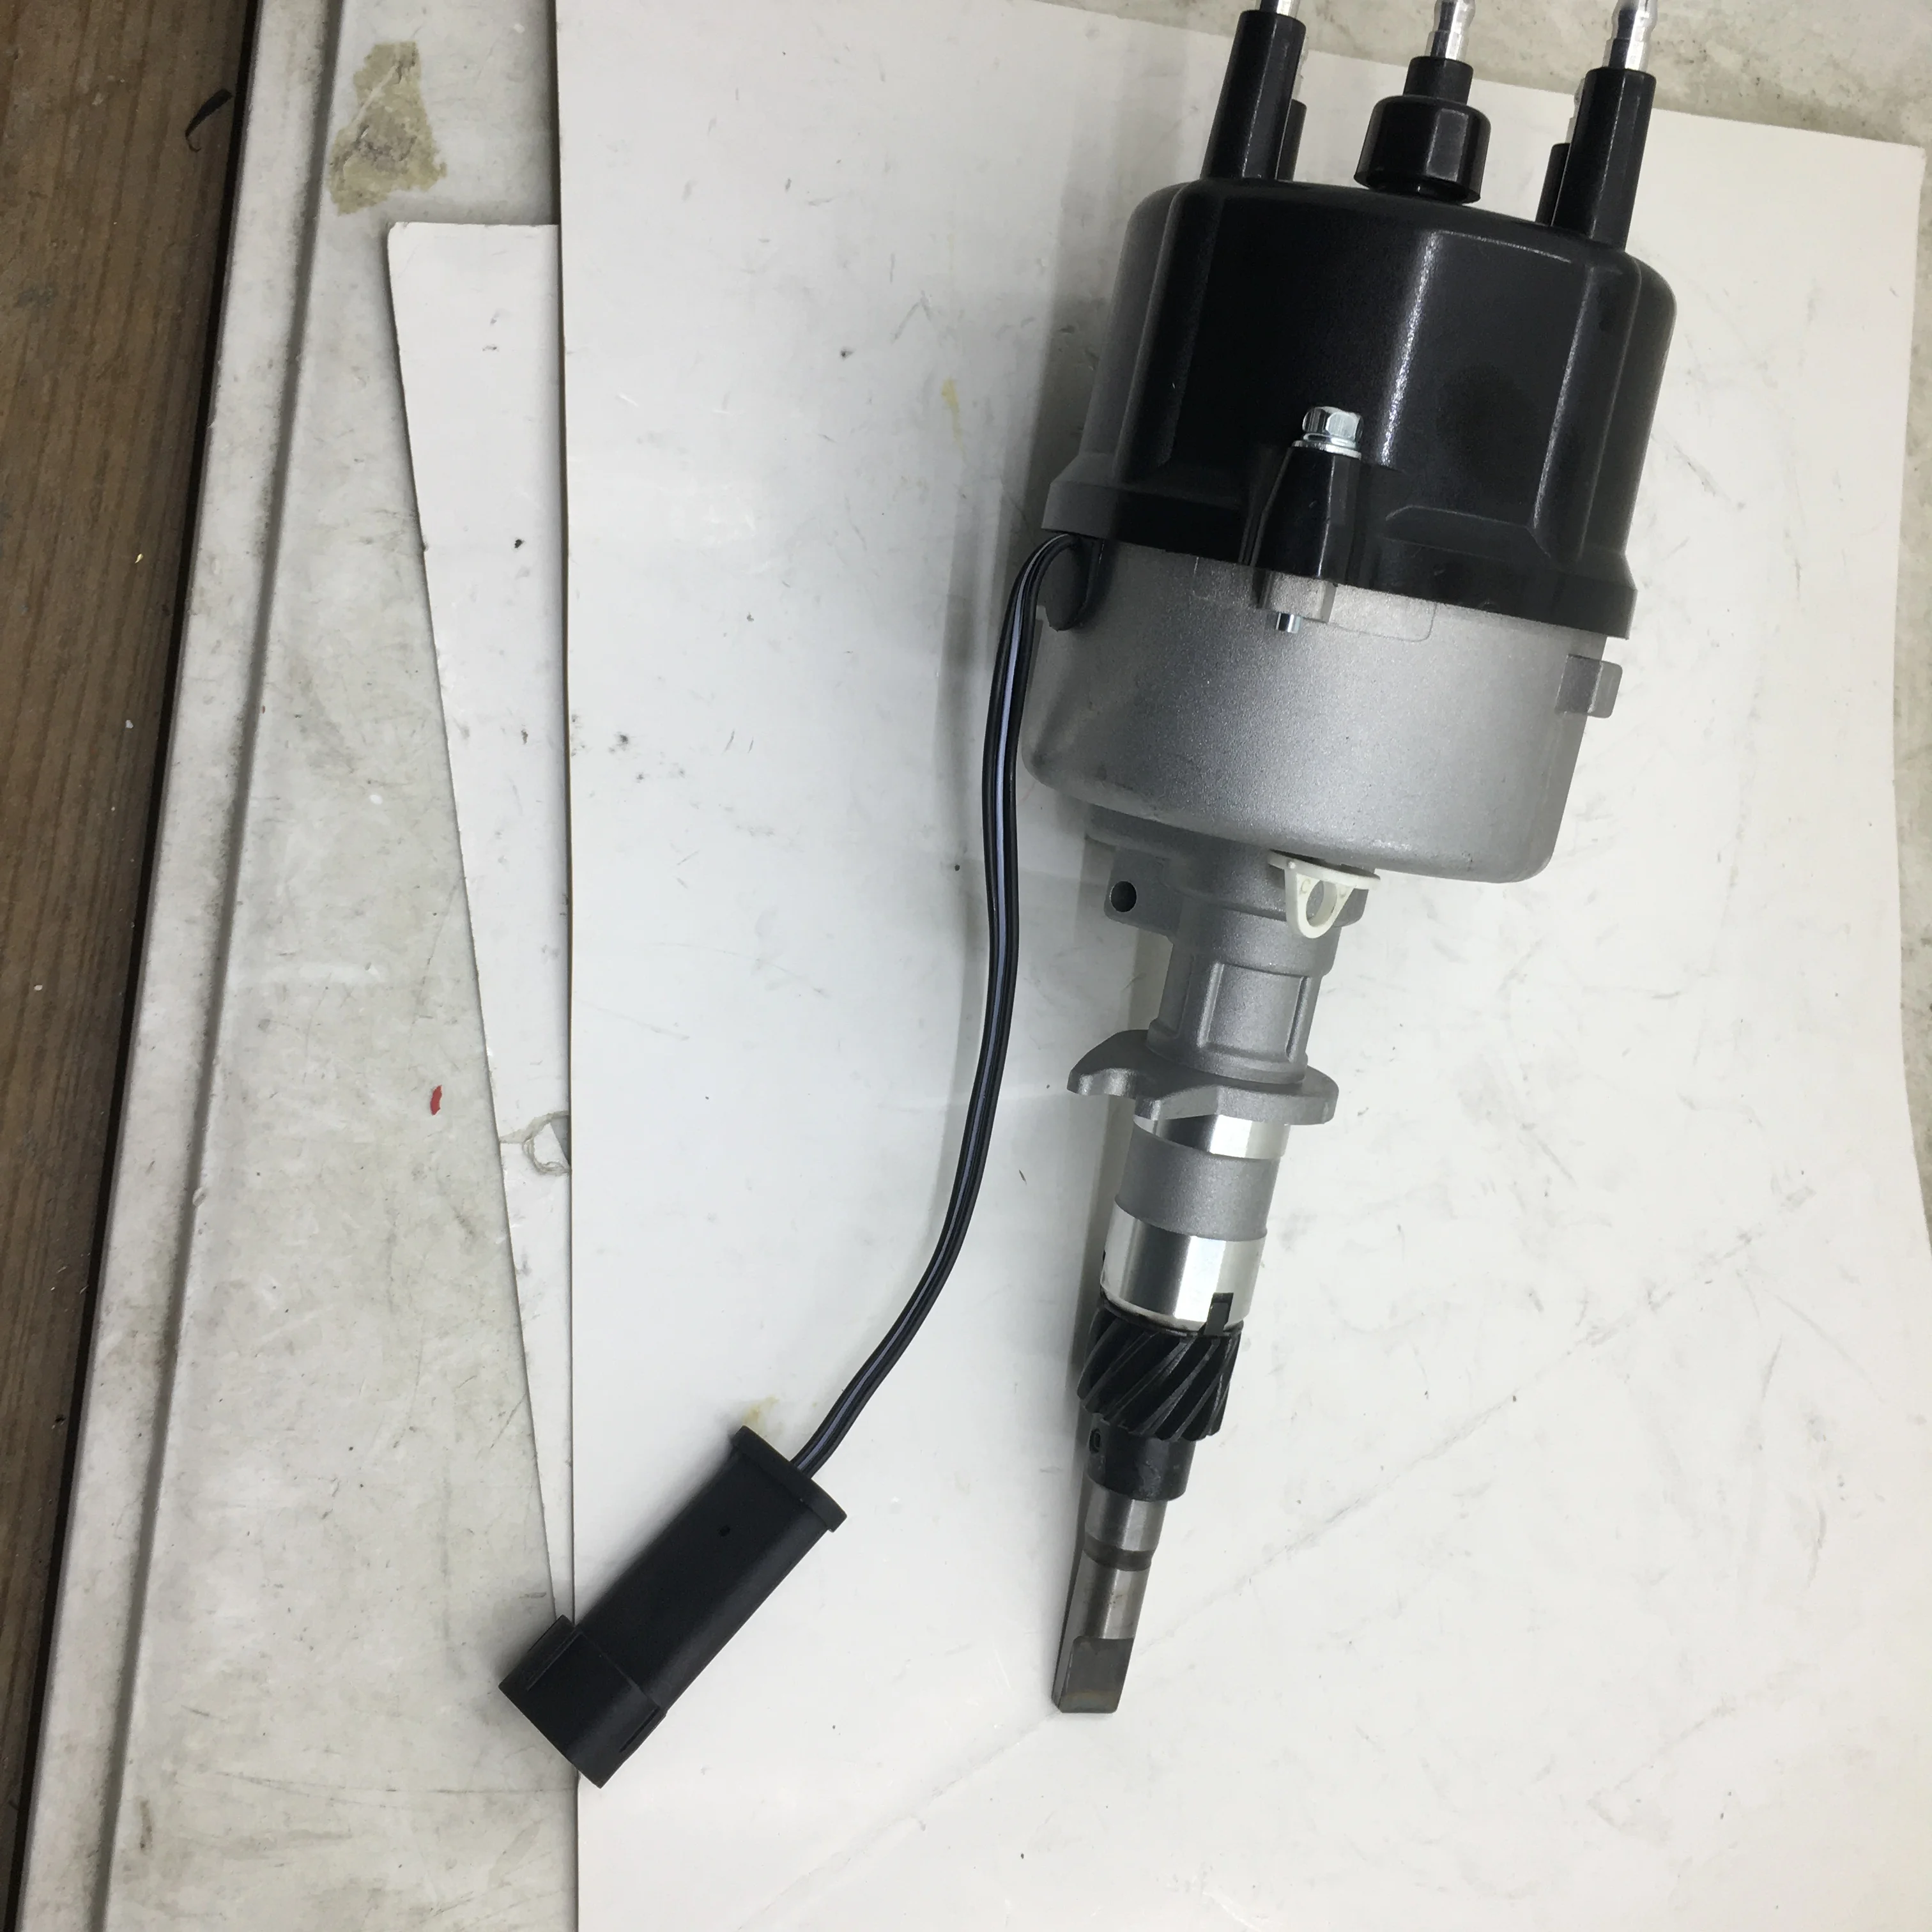 Sherryberg New Ignition Distributor For Jeep Cherokee Chrysler Dodge 242cid  1994 1995 1996 1997 56027027 56027027ab  - Distributors & Parts -  AliExpress